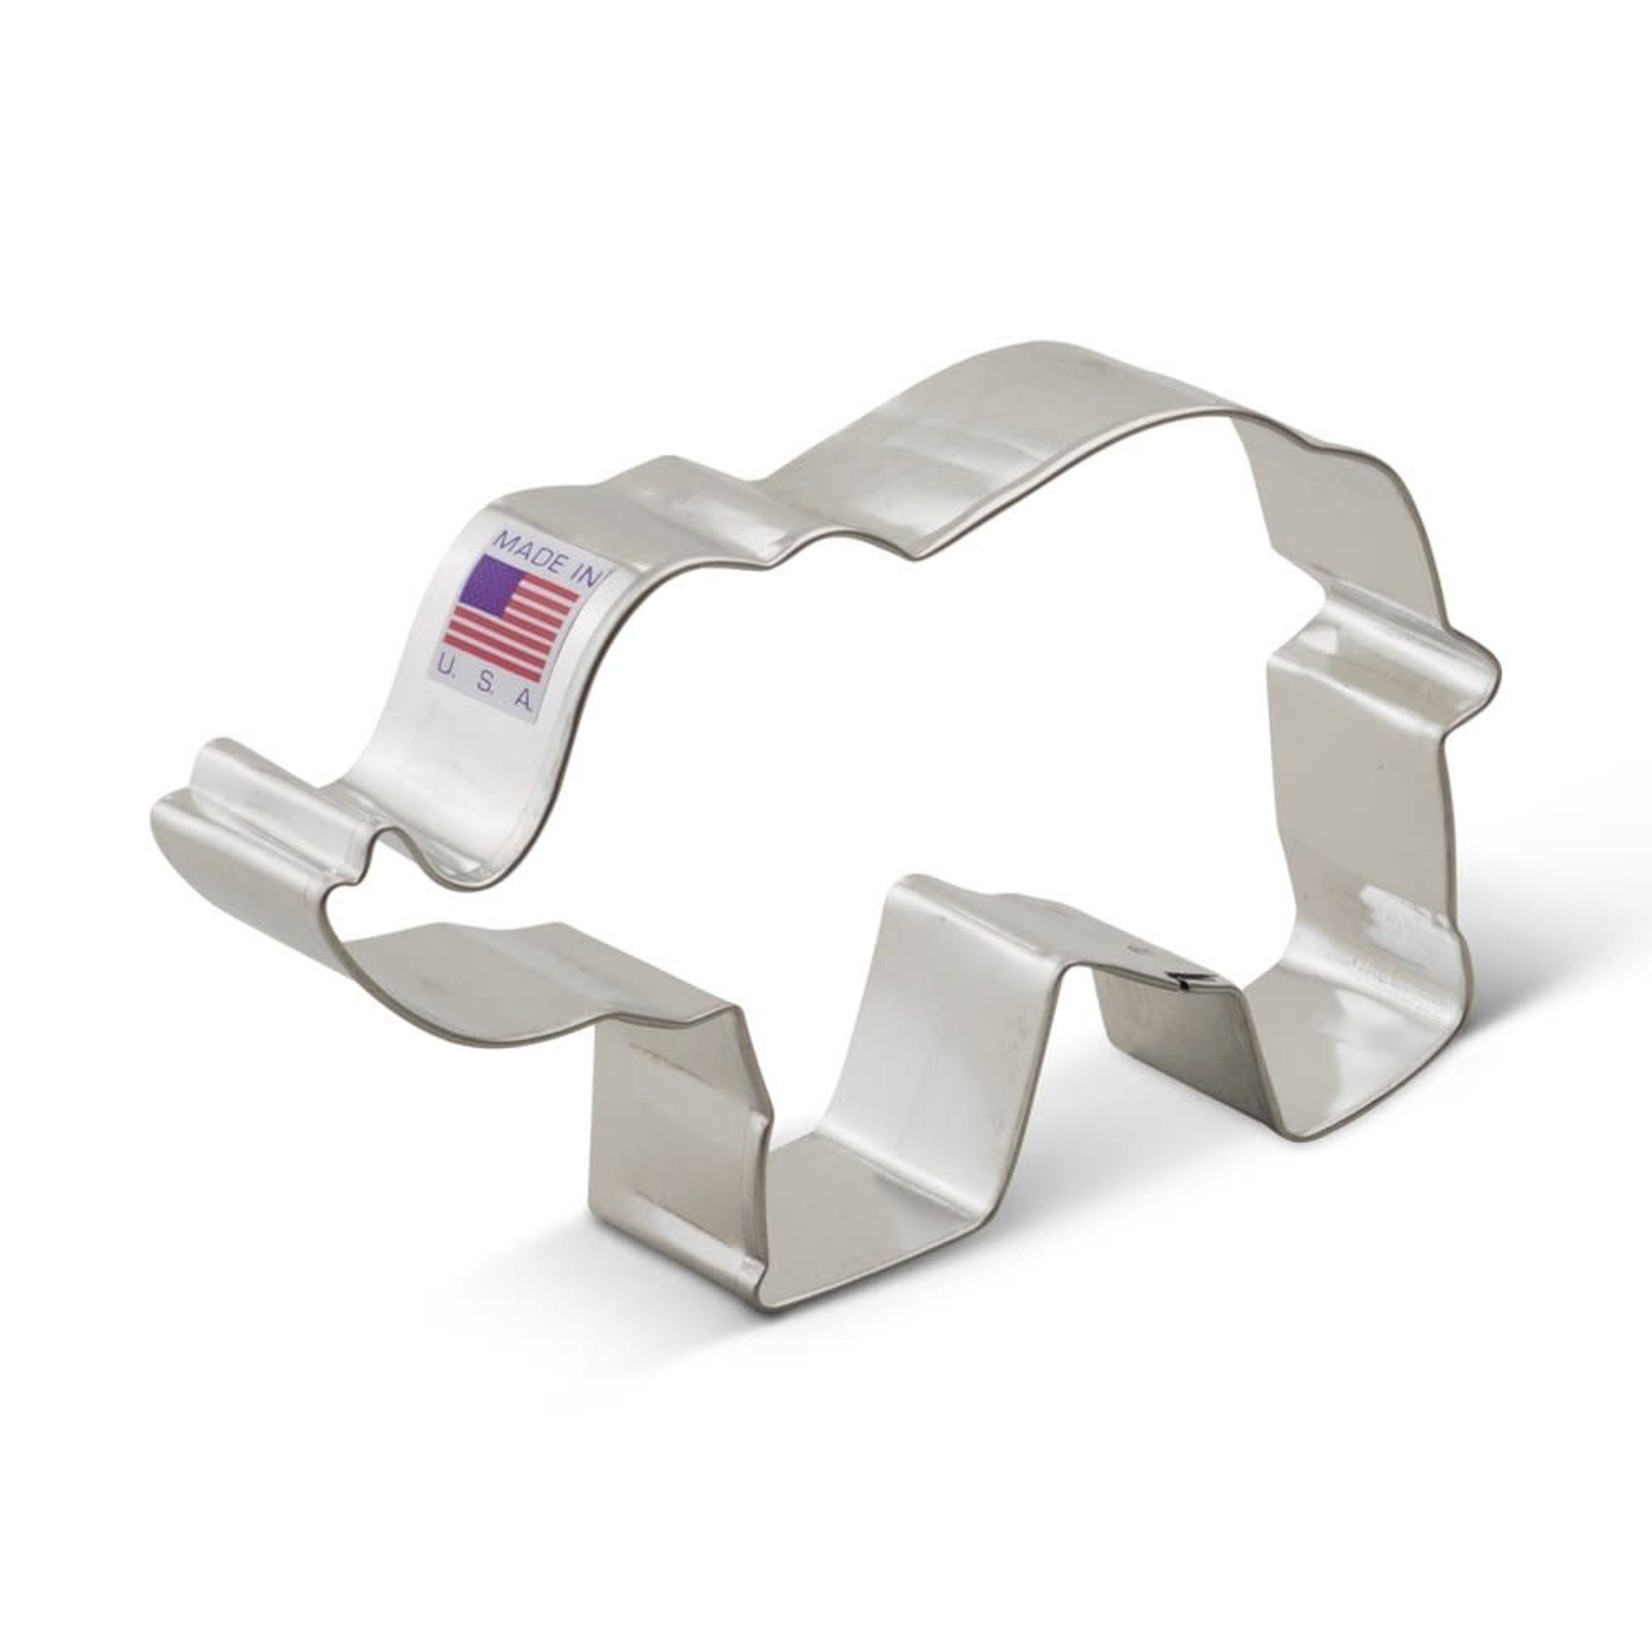 TWS 5" Elephant Cookie Cutter